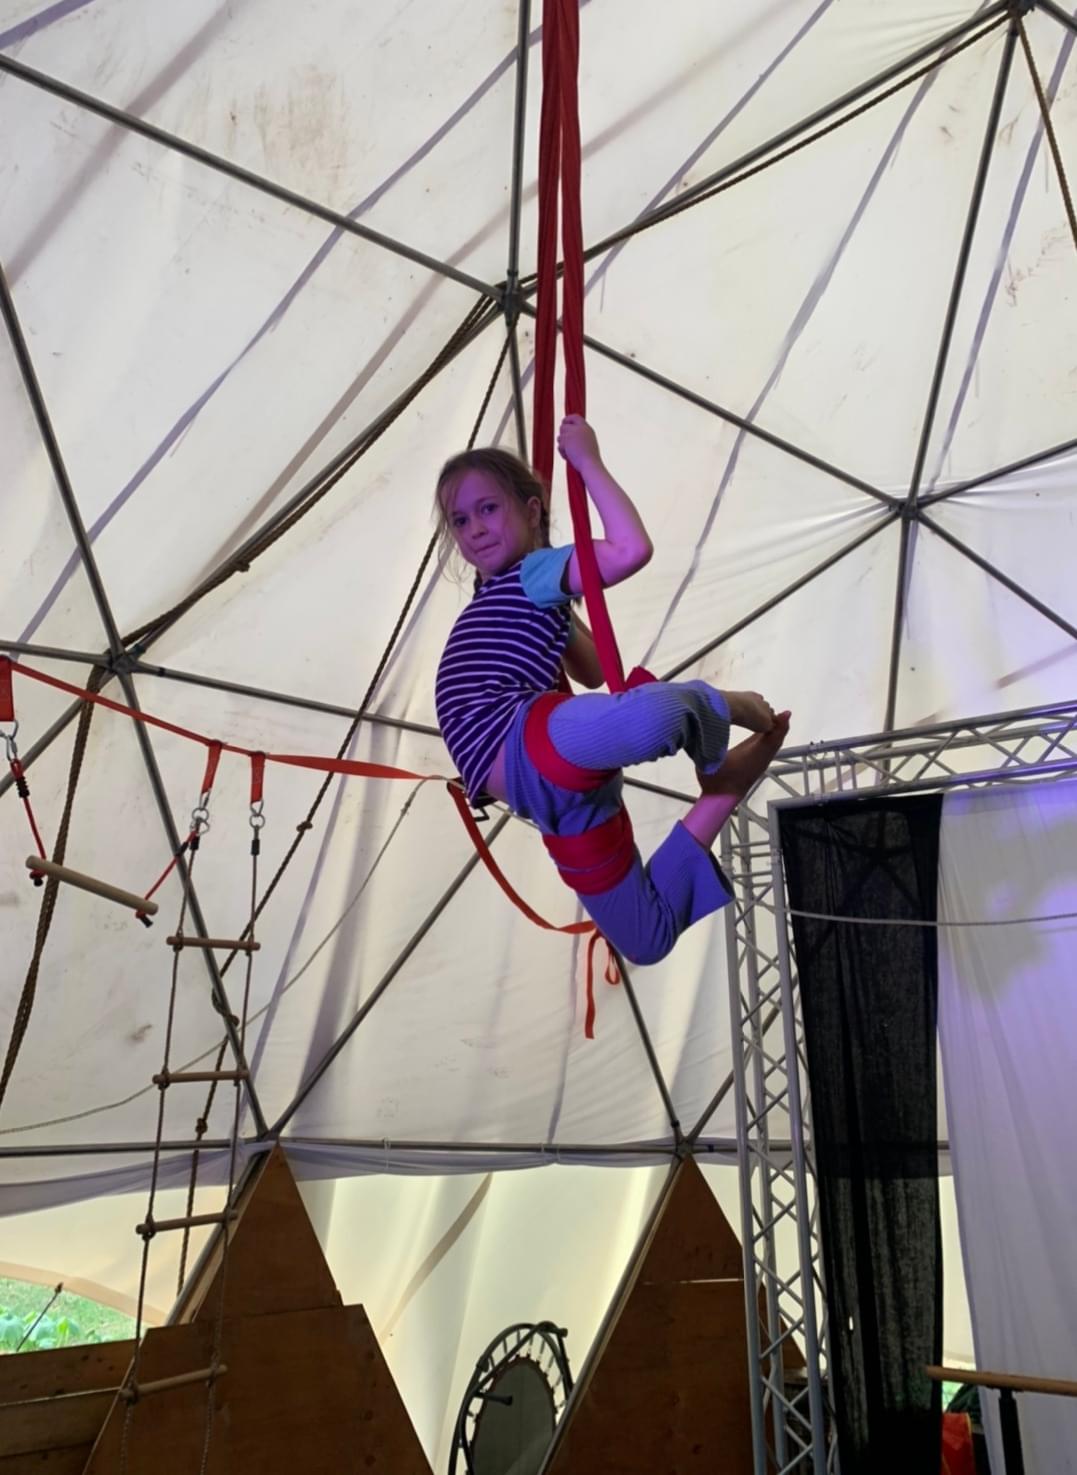 Child in Circus Tent doing Aerial,